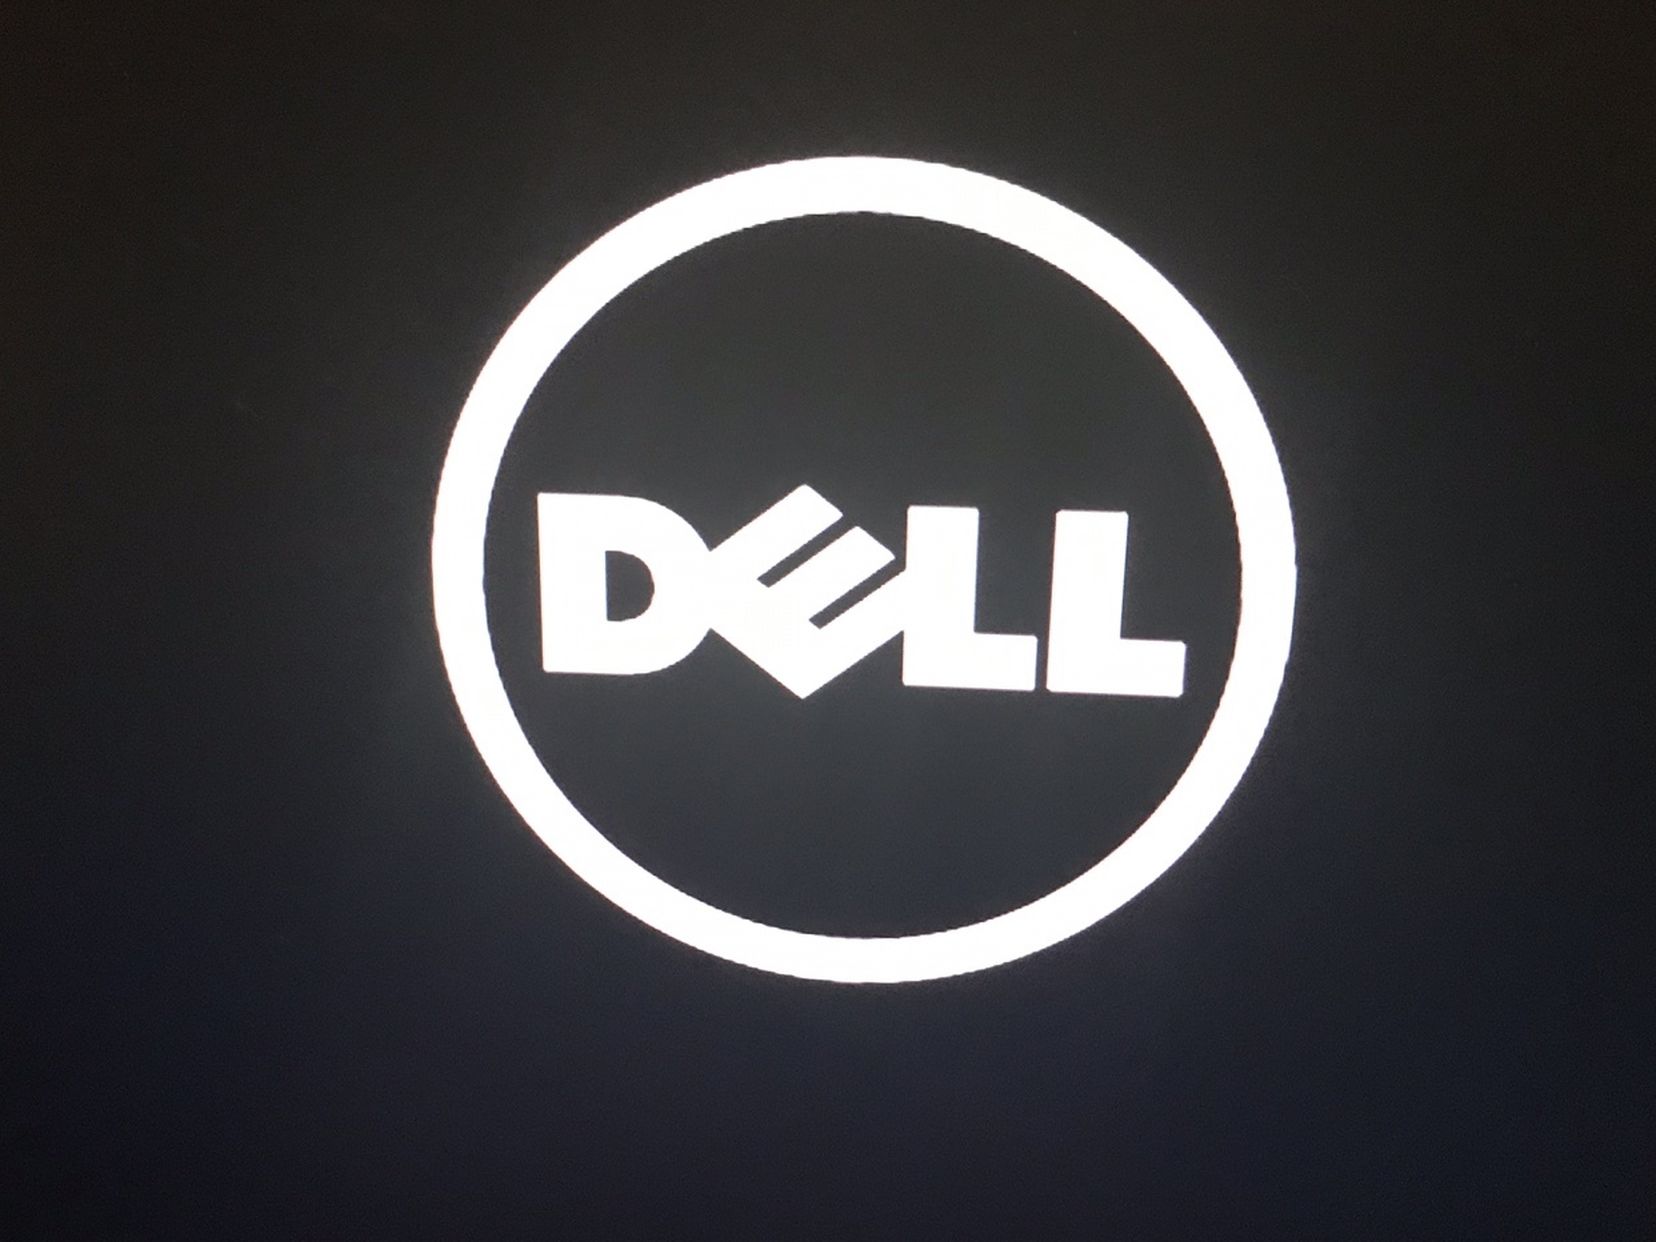 Used Monitor DELL 4 FREE